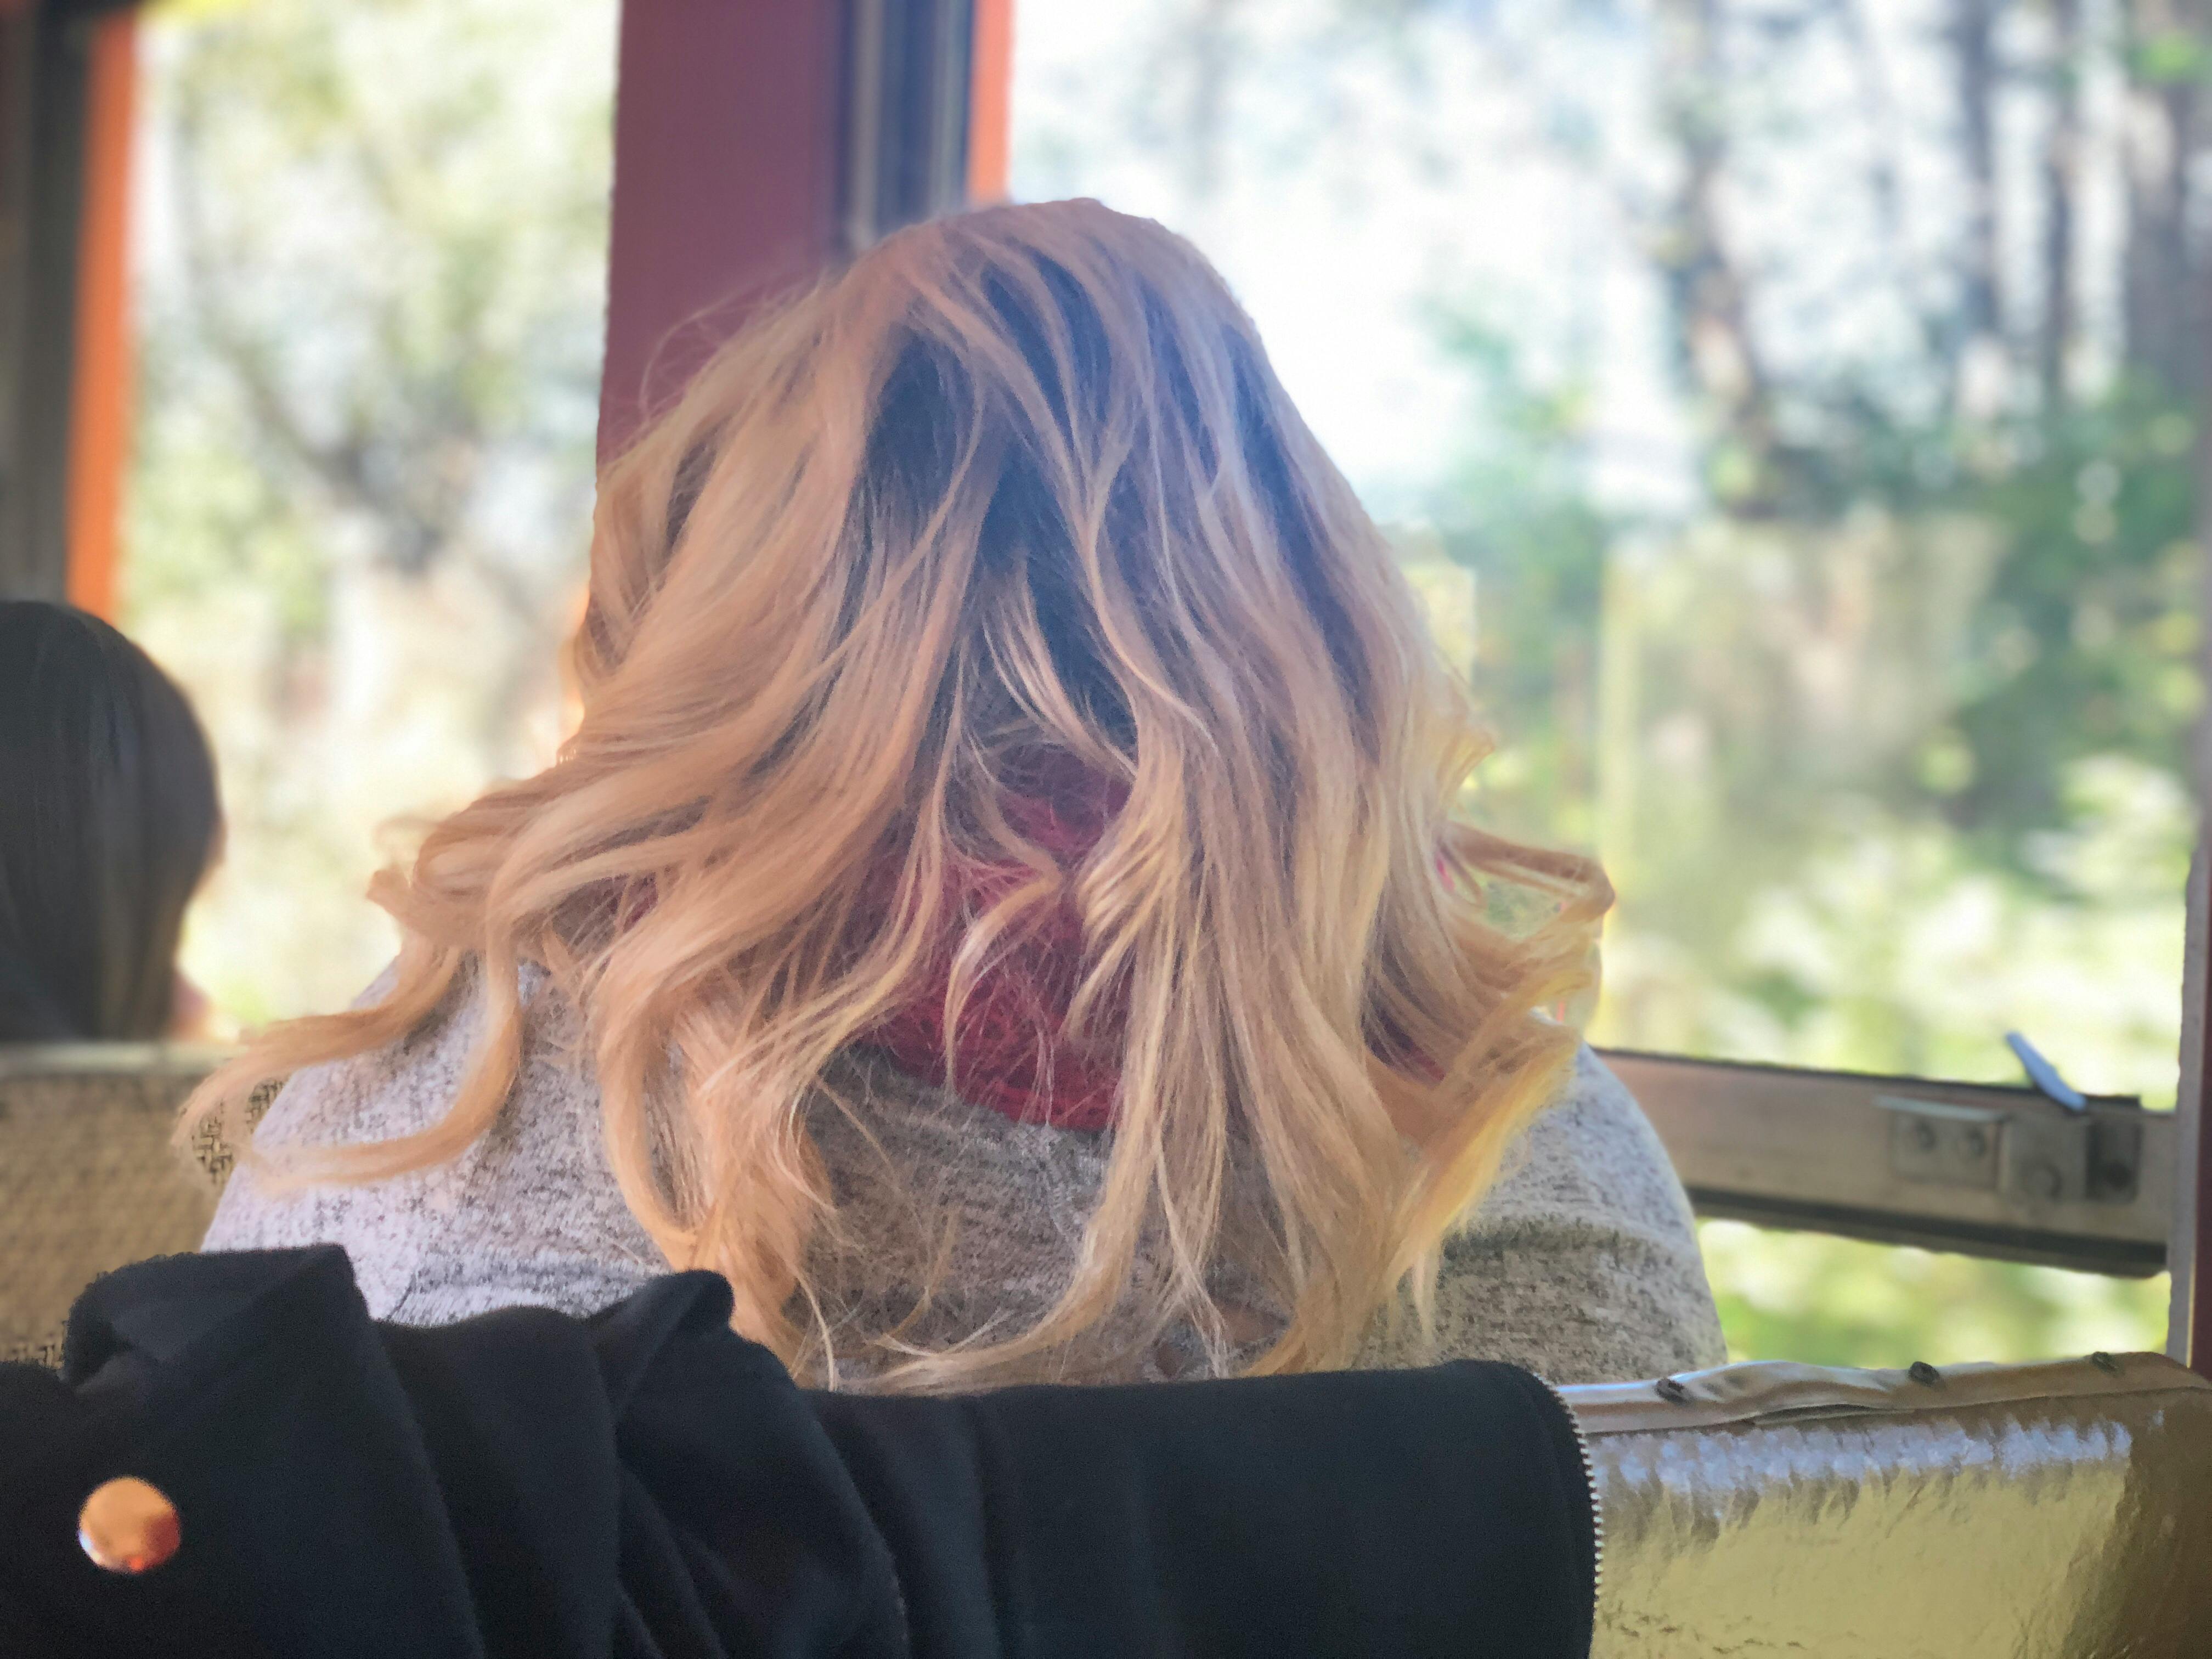 Free Stock Photo Of Blonde Hair From Behind Train